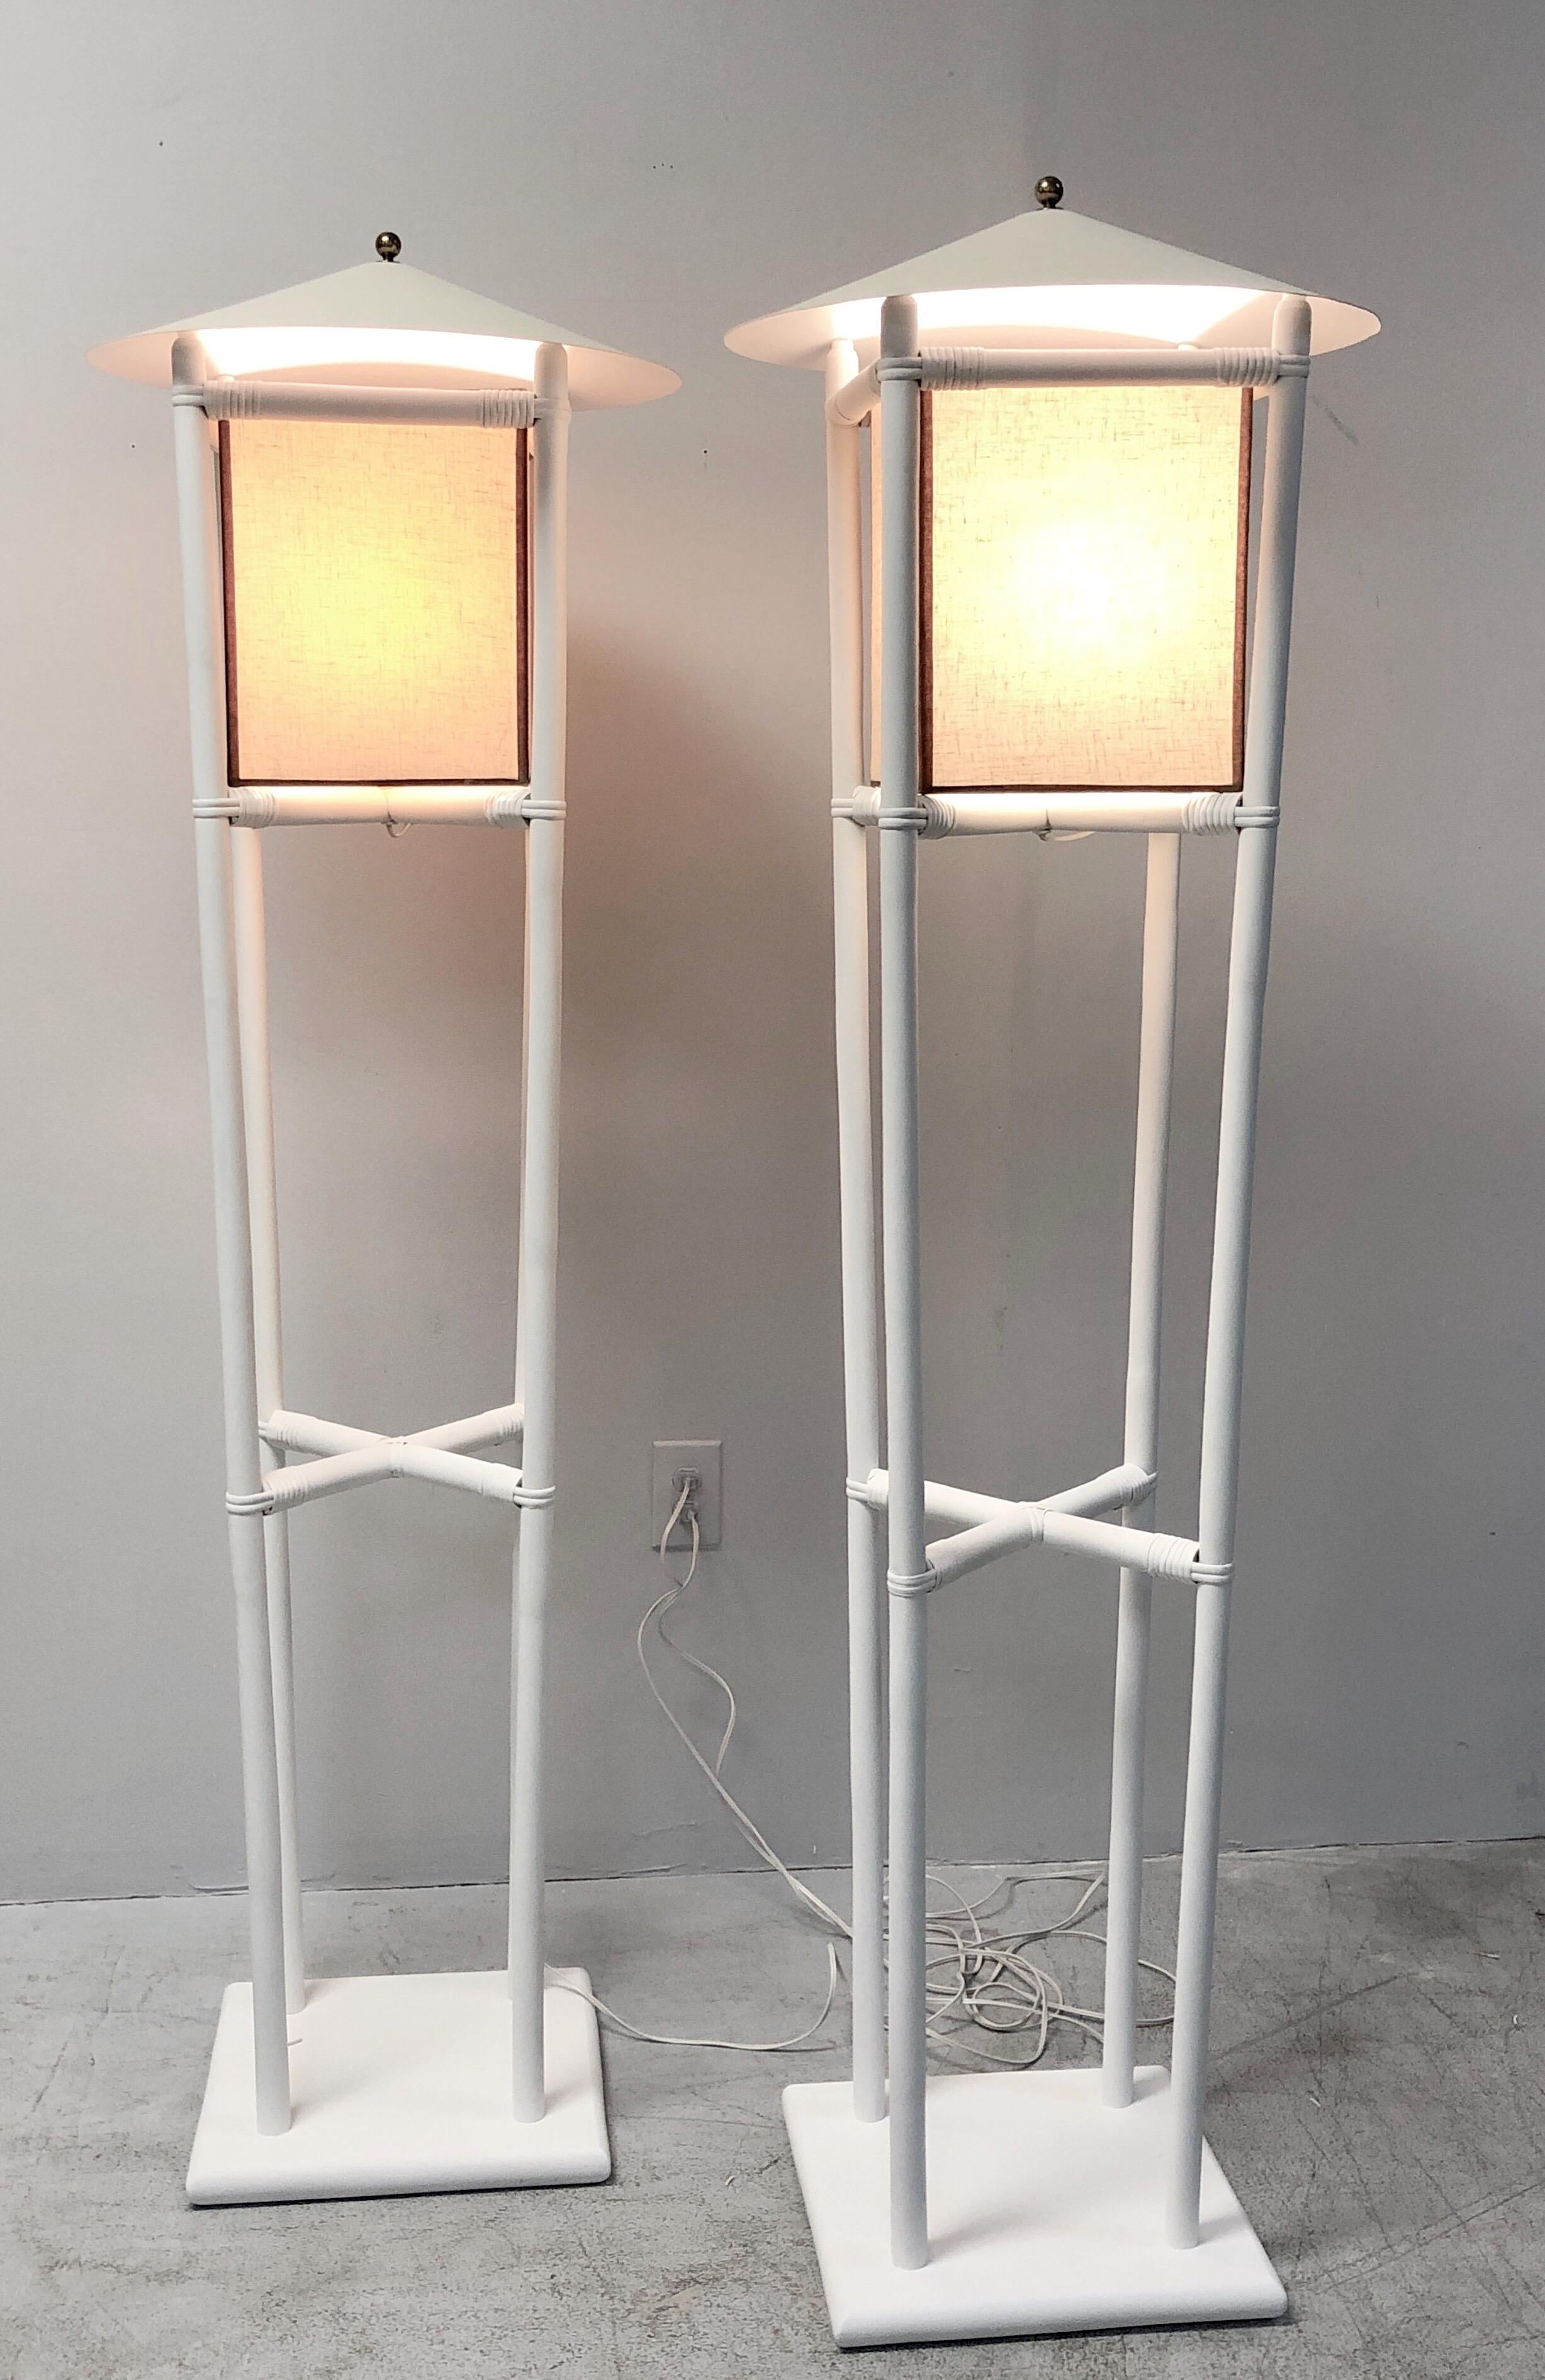 A pair of rarely seen bamboo lamps by Tommi Parzinger, part of the Pavillion collection he designed for Willow and Reed. Bamboo frames with fabric shades and metal diffusers. Refinished in flat white enamel. Original shades, the metal diffusers are